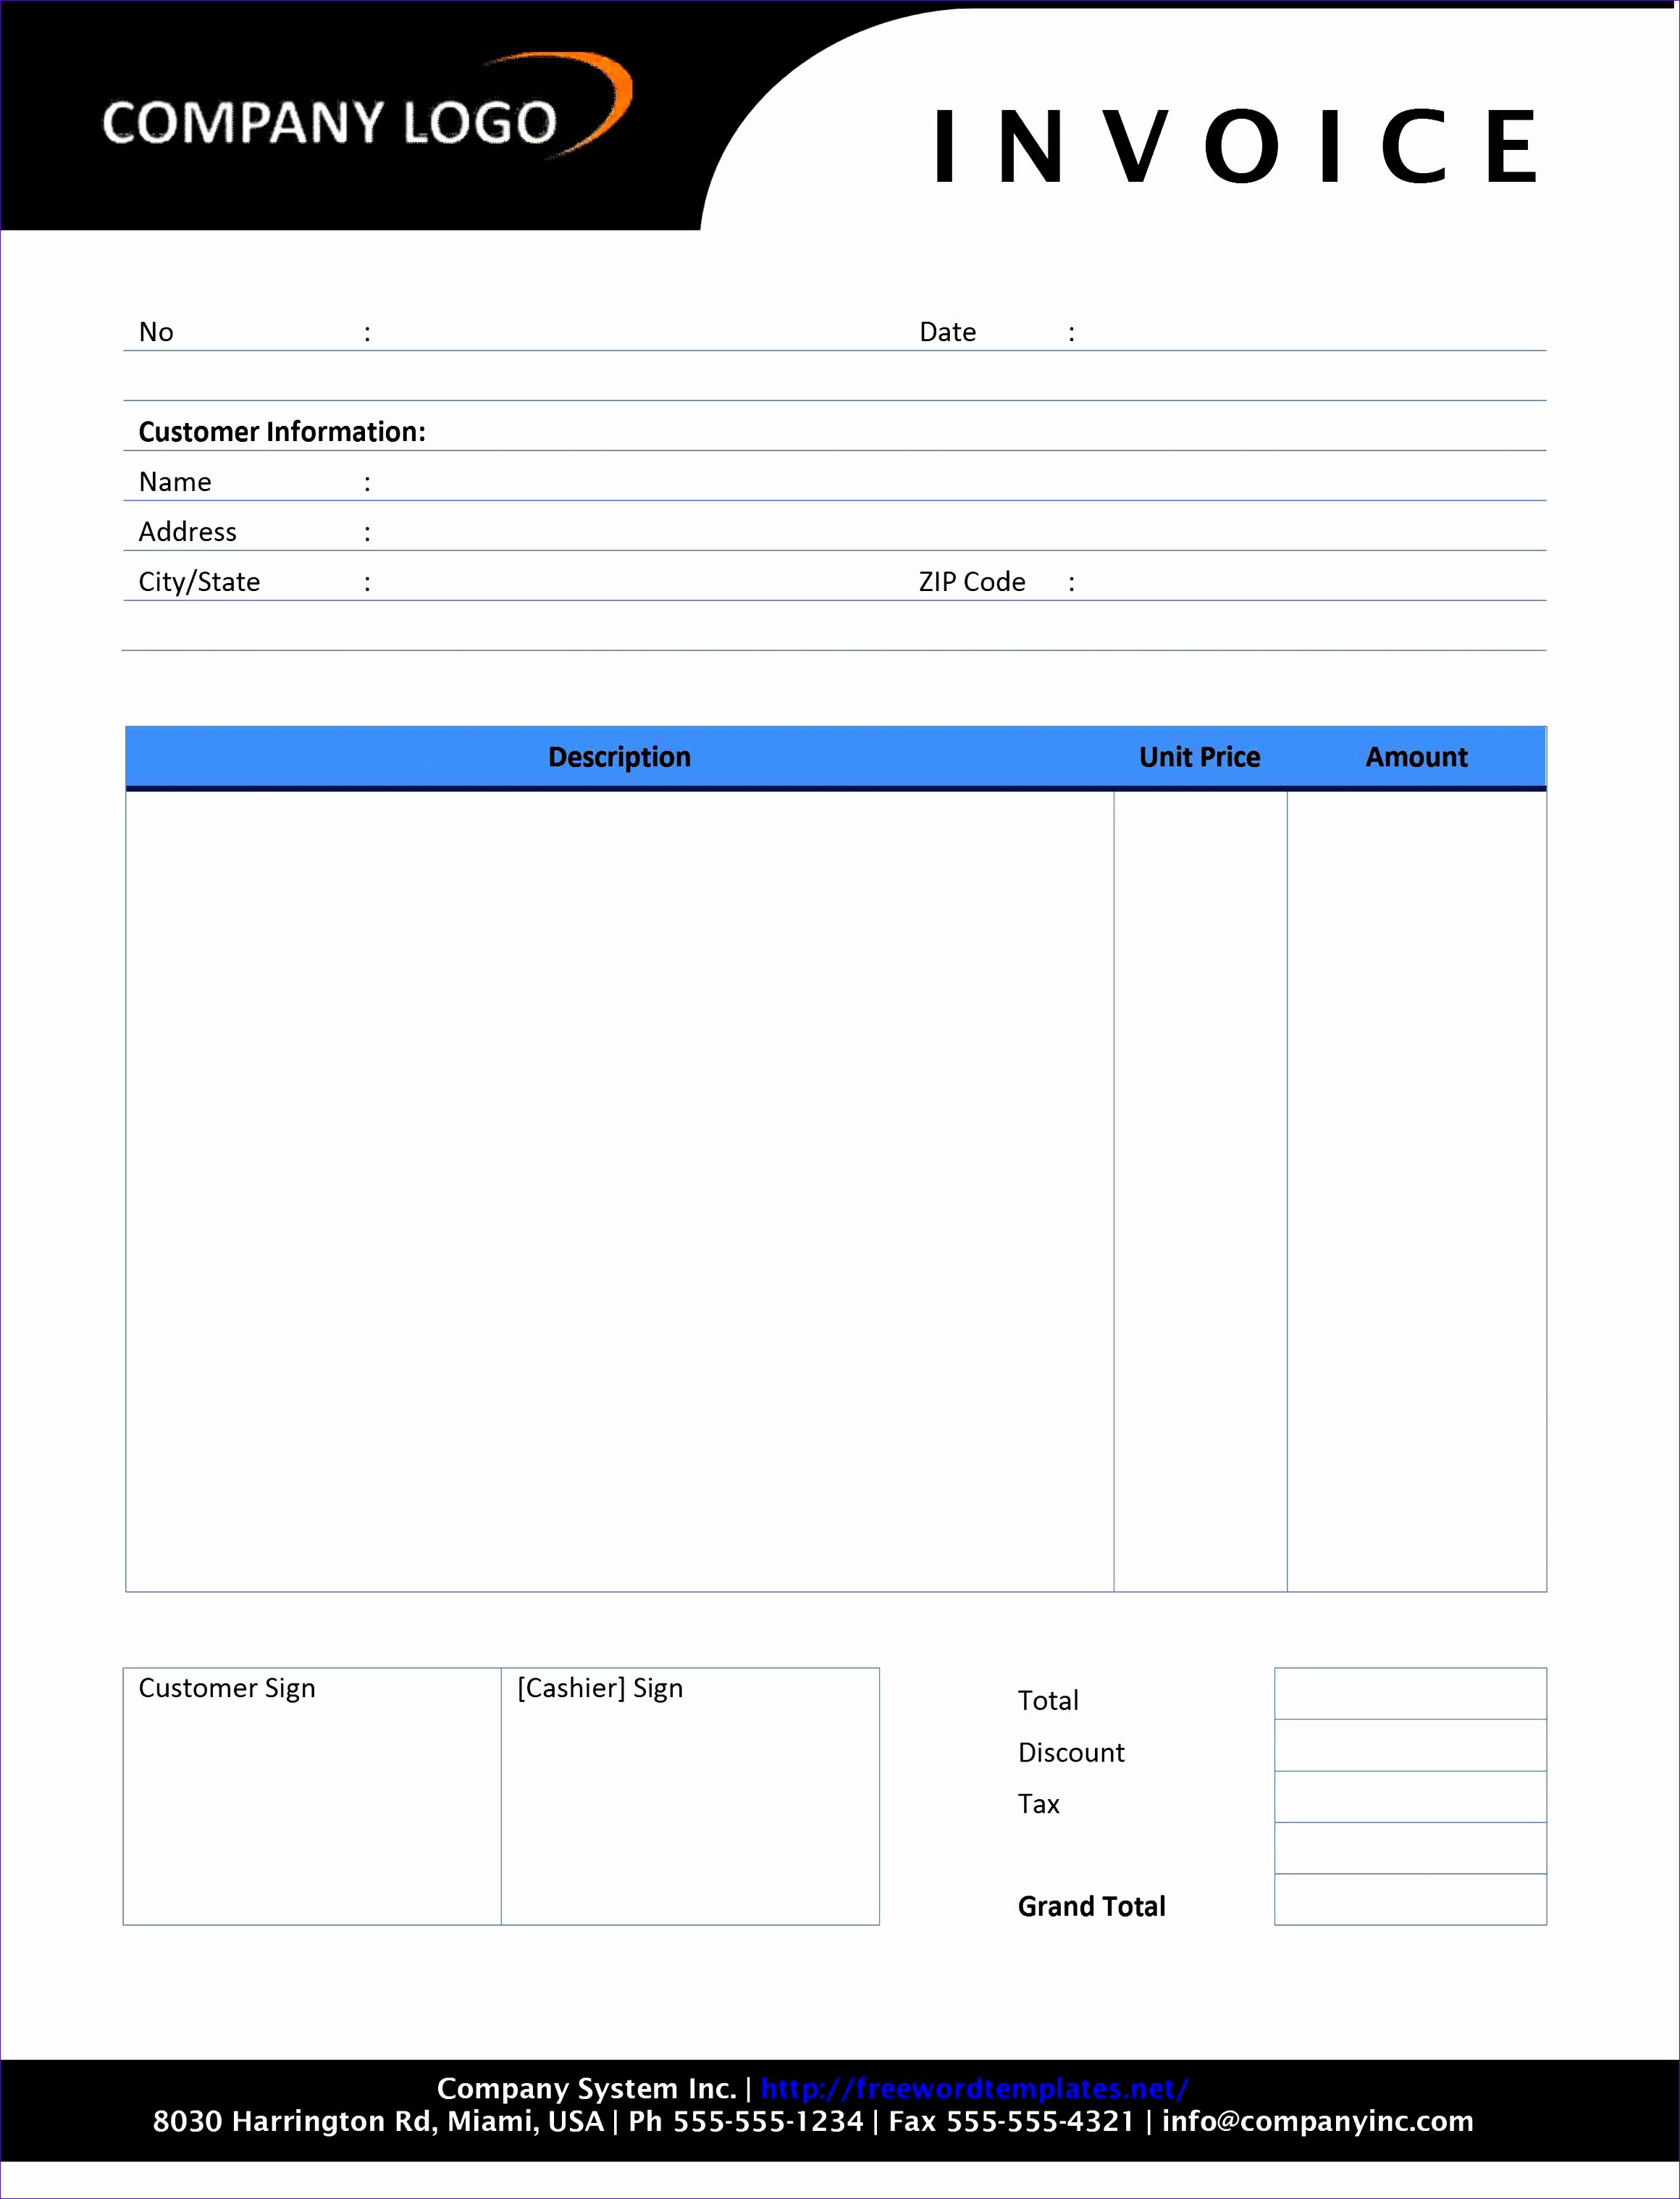 invoice receipt template word business templates invoice template invoices ready made office uk sample free hll open libreoffice word 2003 doctor doctors mac polaris for excel service dental yLsbKf